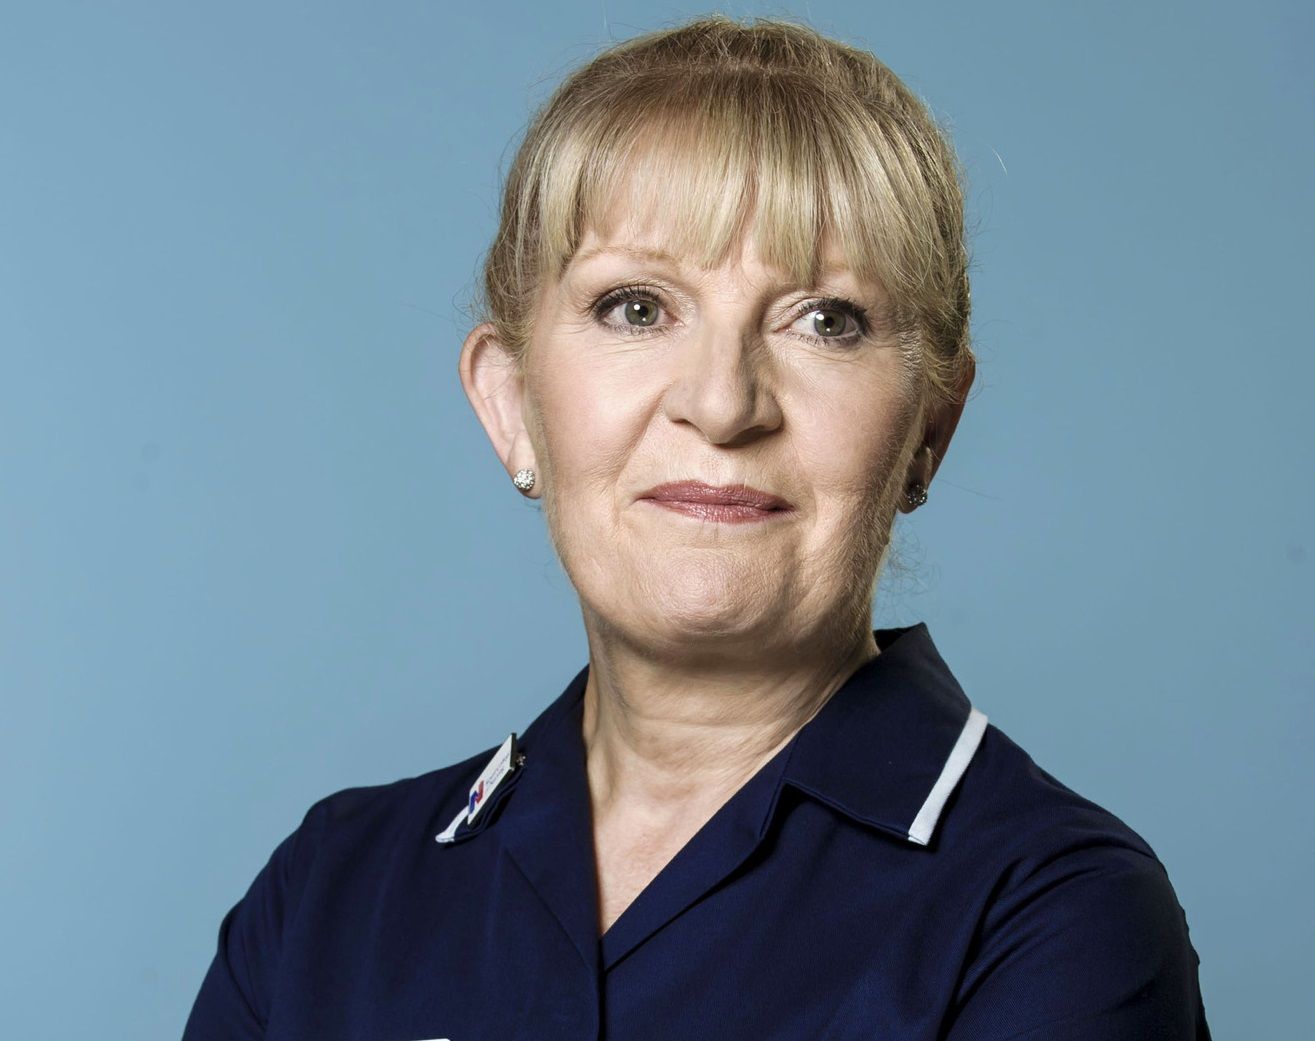 Casualty star reacts death